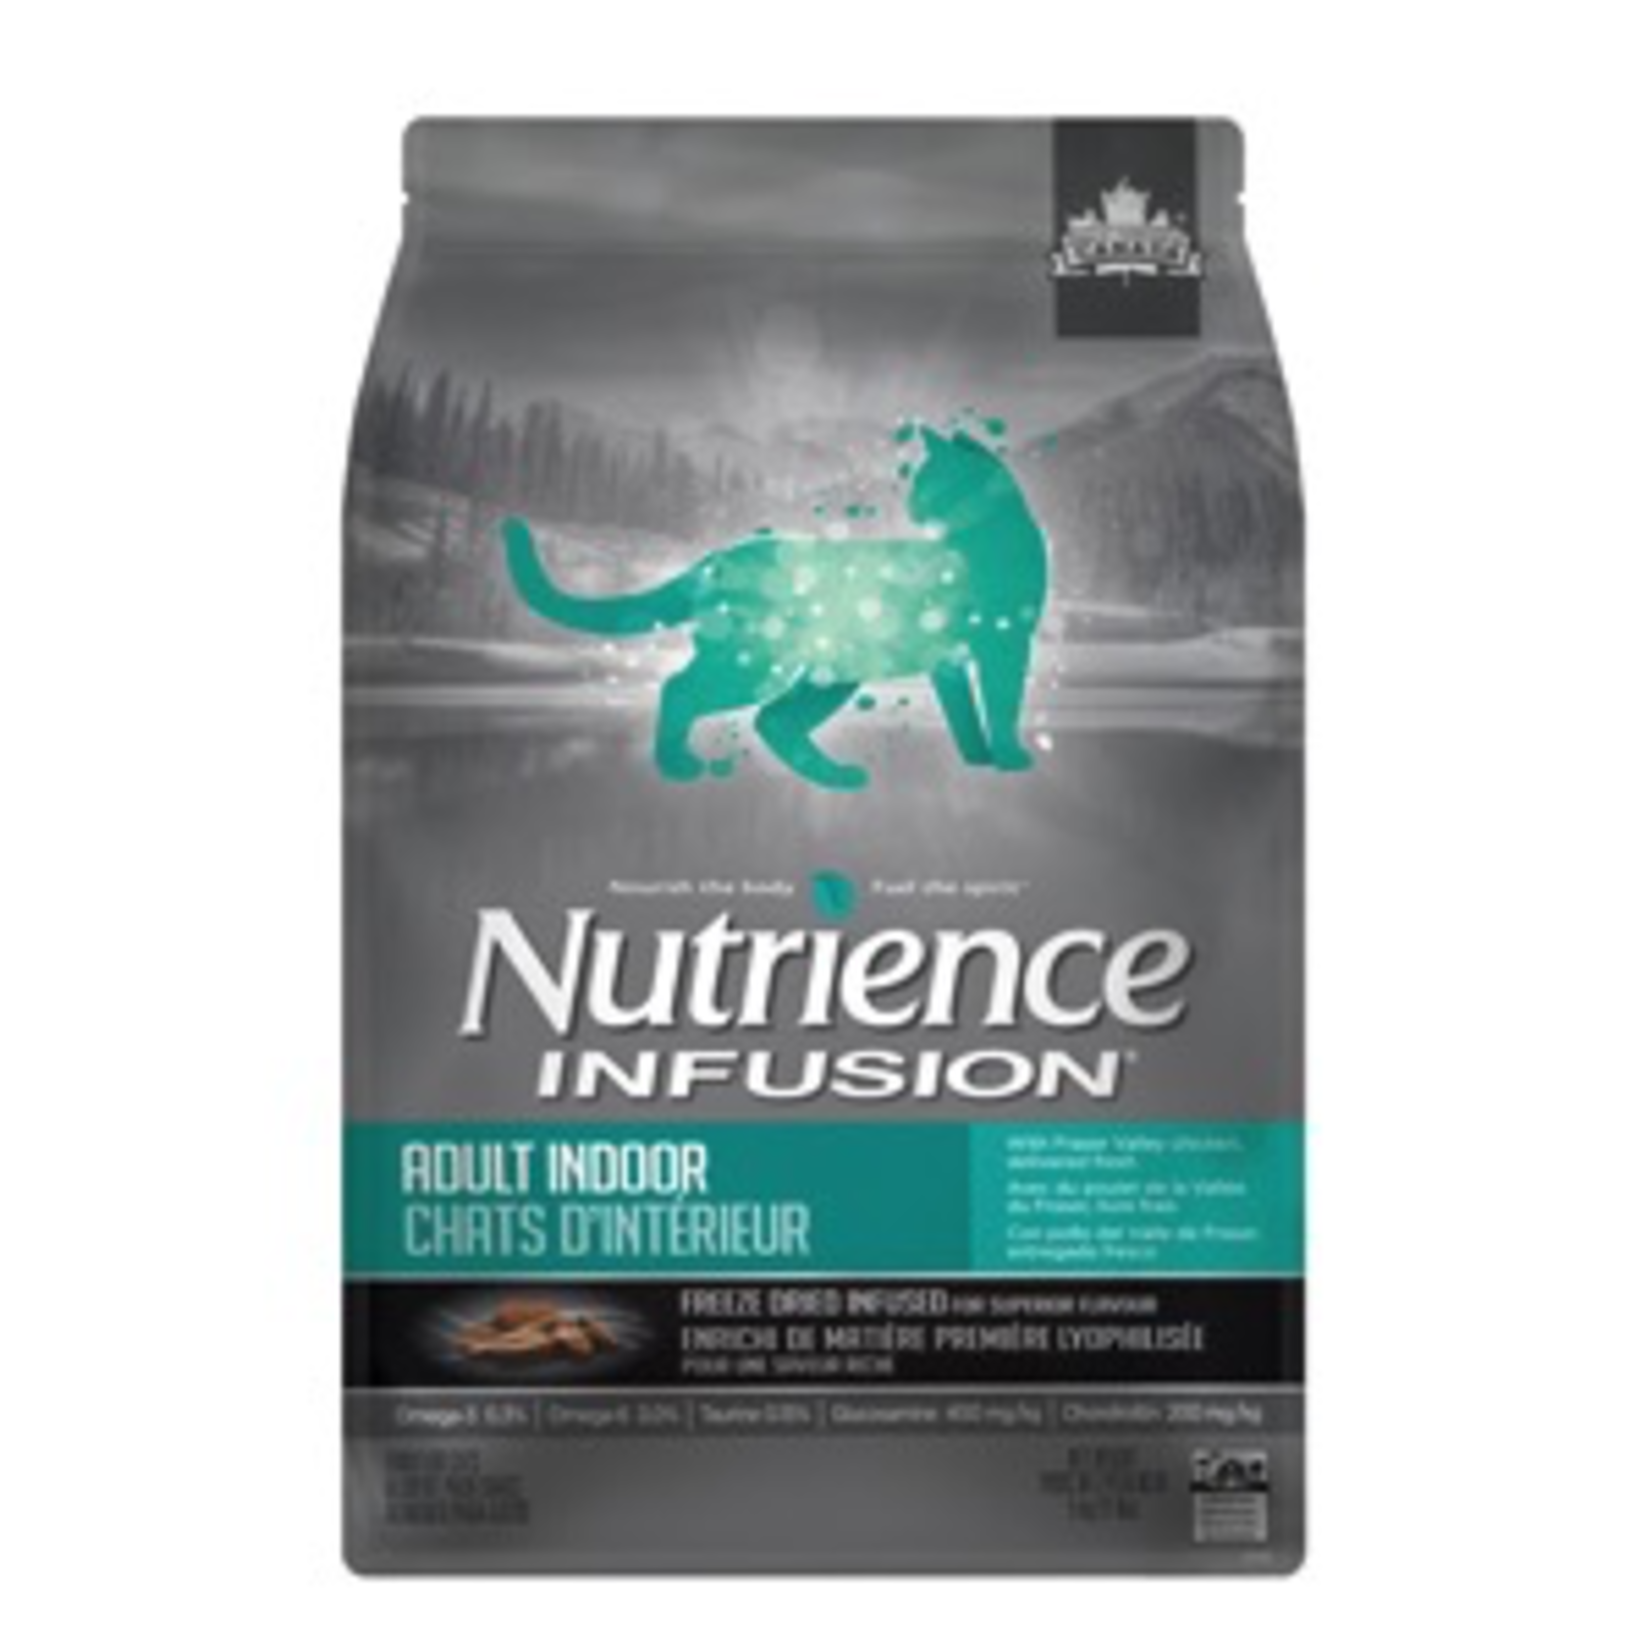 NUTRIENCE Nutrience Infusion Adult Indoor For Cats - Chicken - 5 kg (11 lbs)